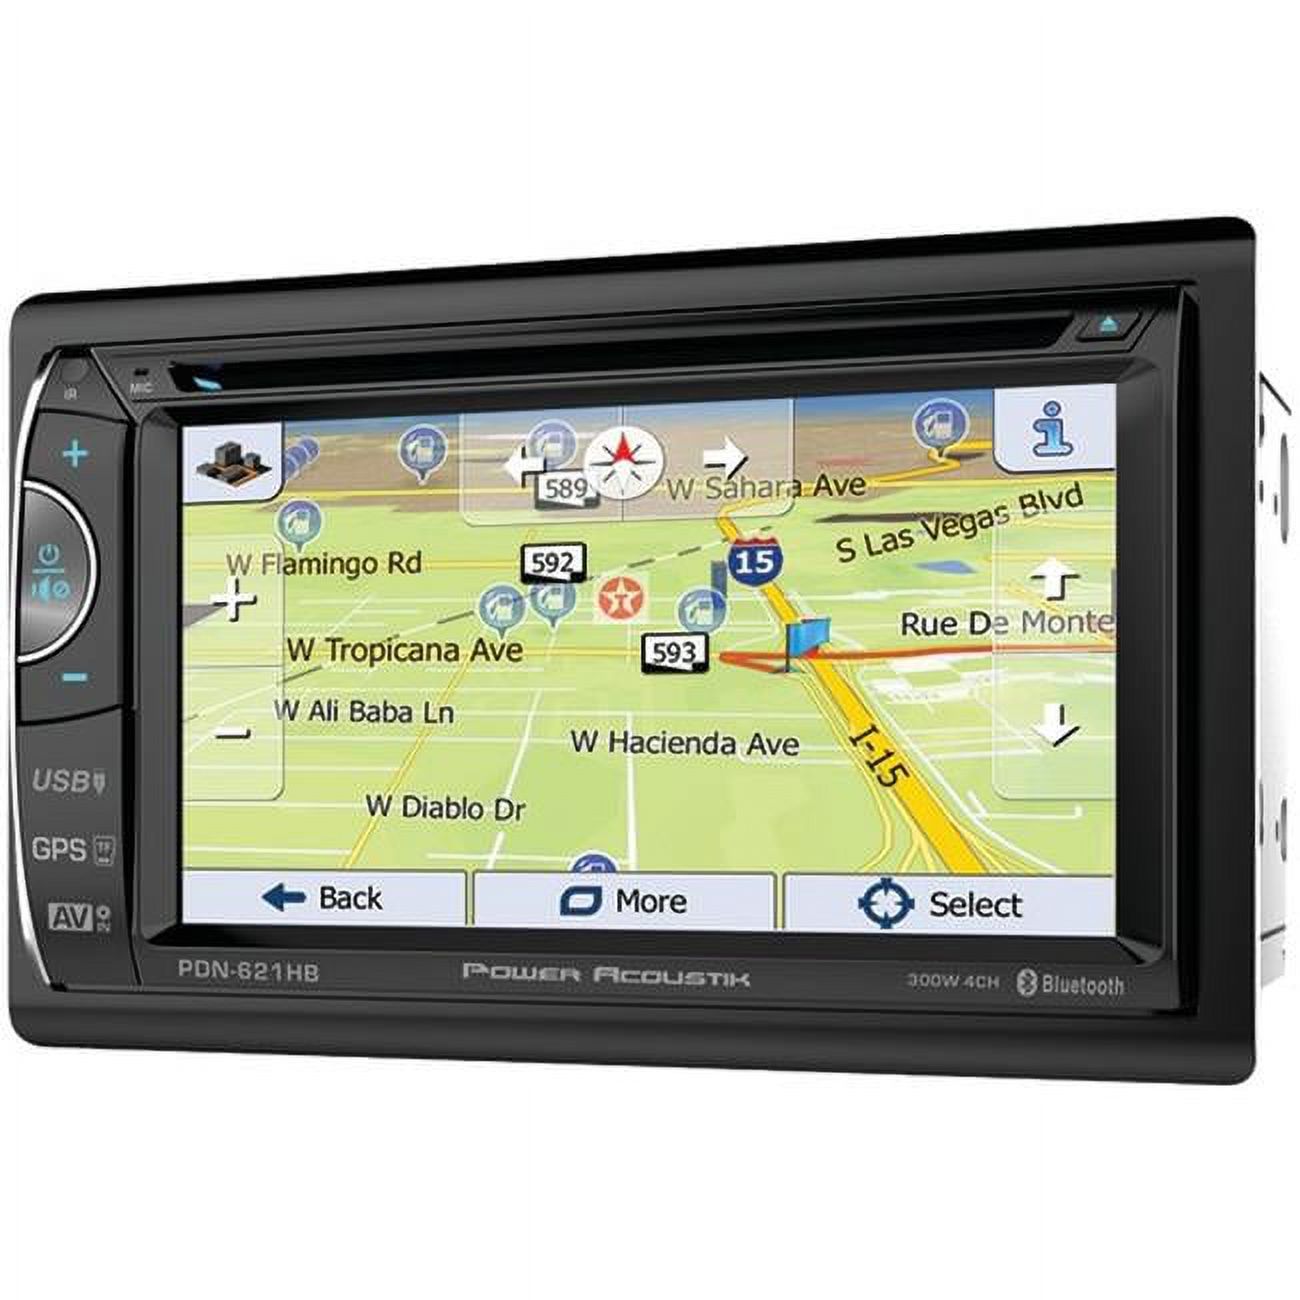 Power Acoustik PDN-621HB Incite Double-DIN In-Dash GPS Navigation LCD Touchscreen DVD Receiver with Bluetooth & MHL MobileLink X2, Black - 6.2 in. - image 1 of 1